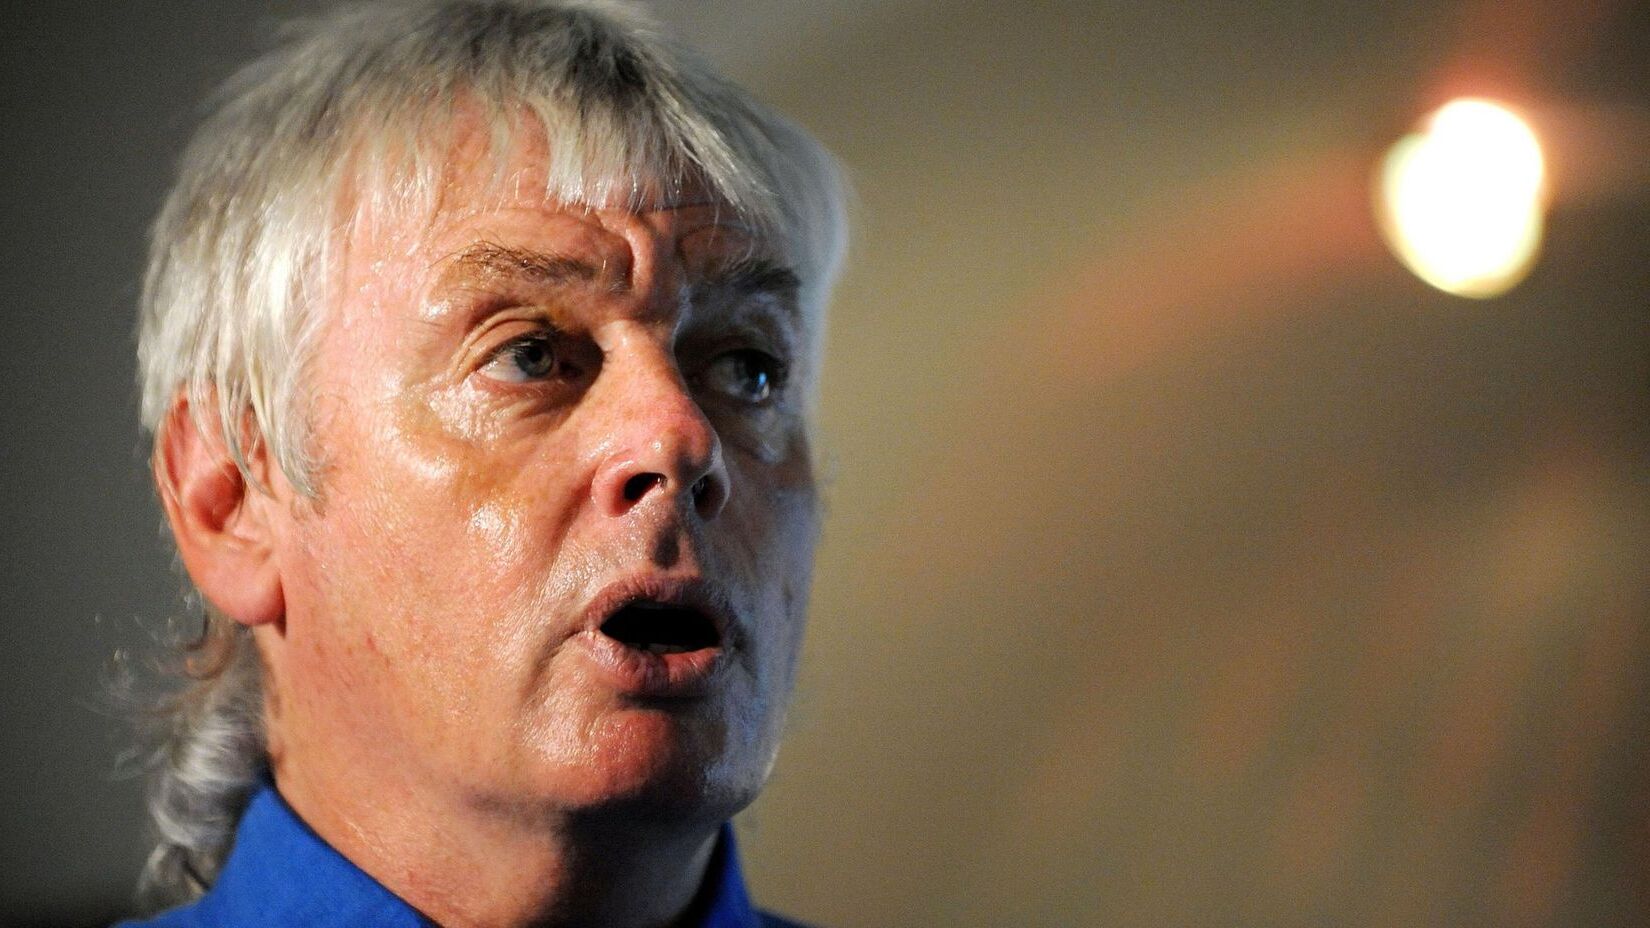 30-facts-about-david-icke